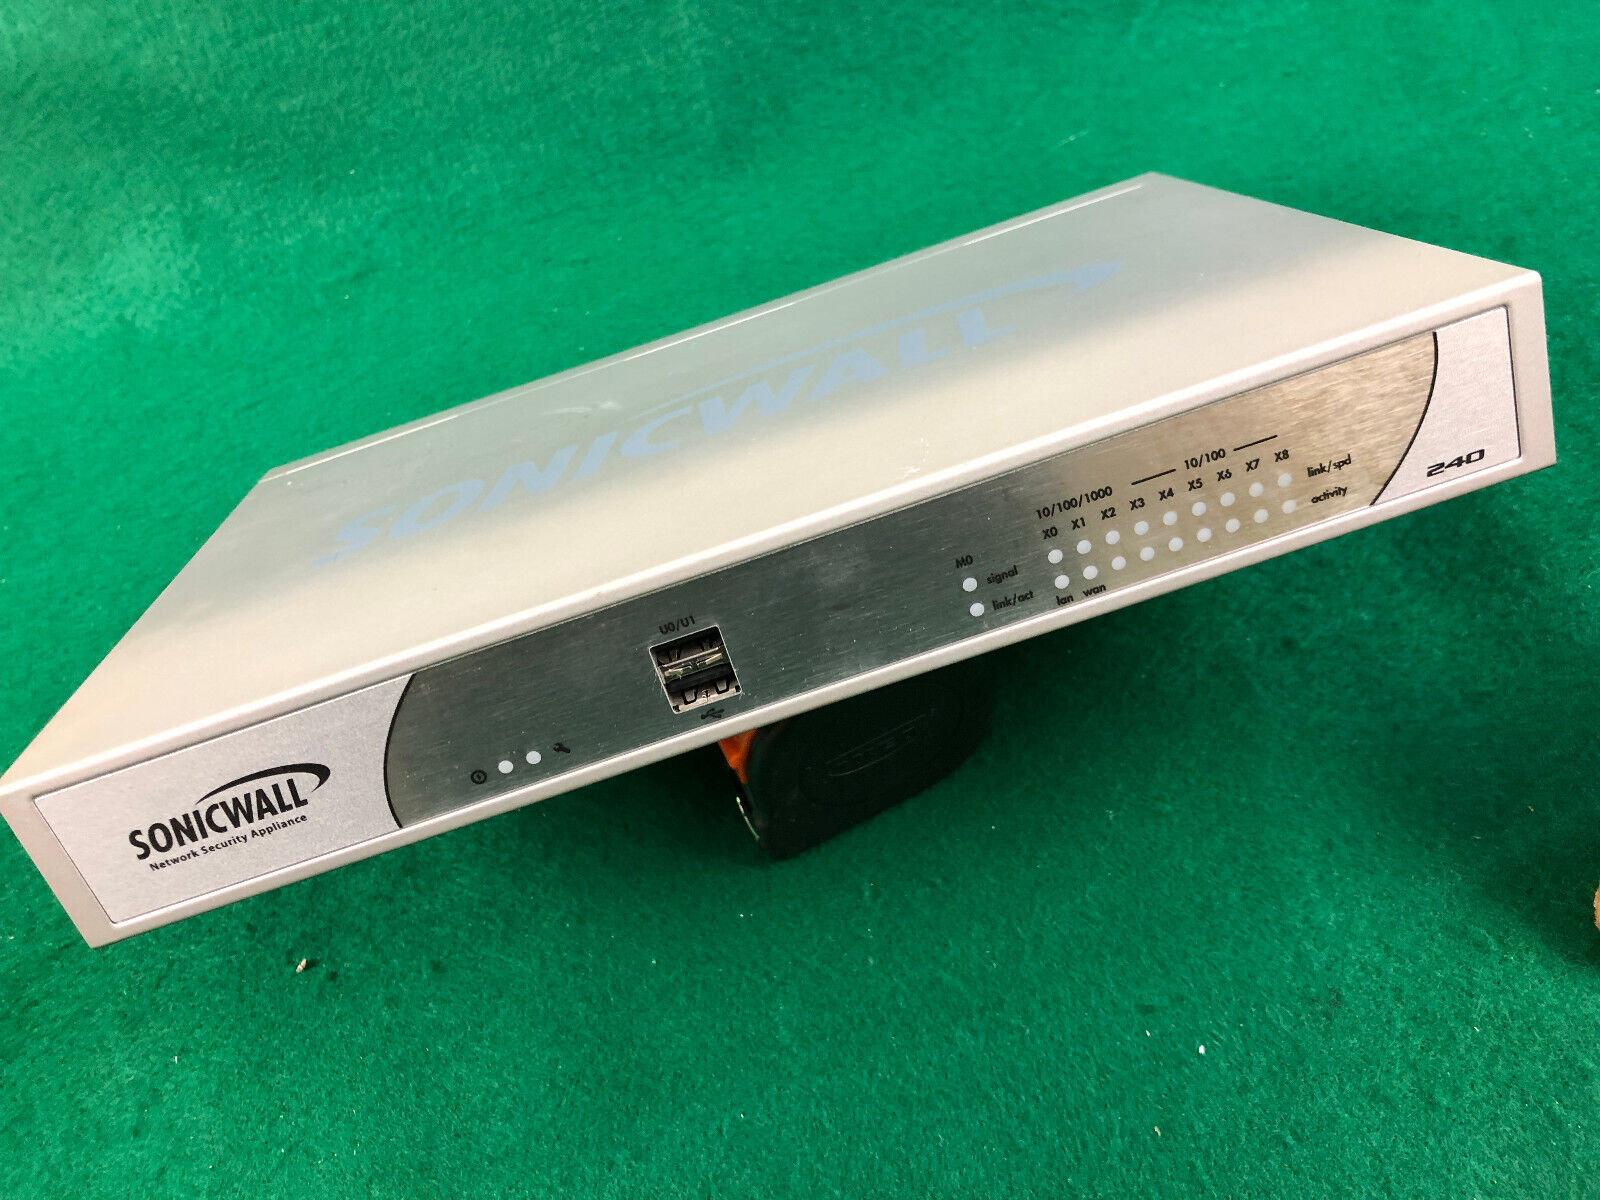 Sonicwall NSA 240 APL19-05C Firewall Network Security Appliance